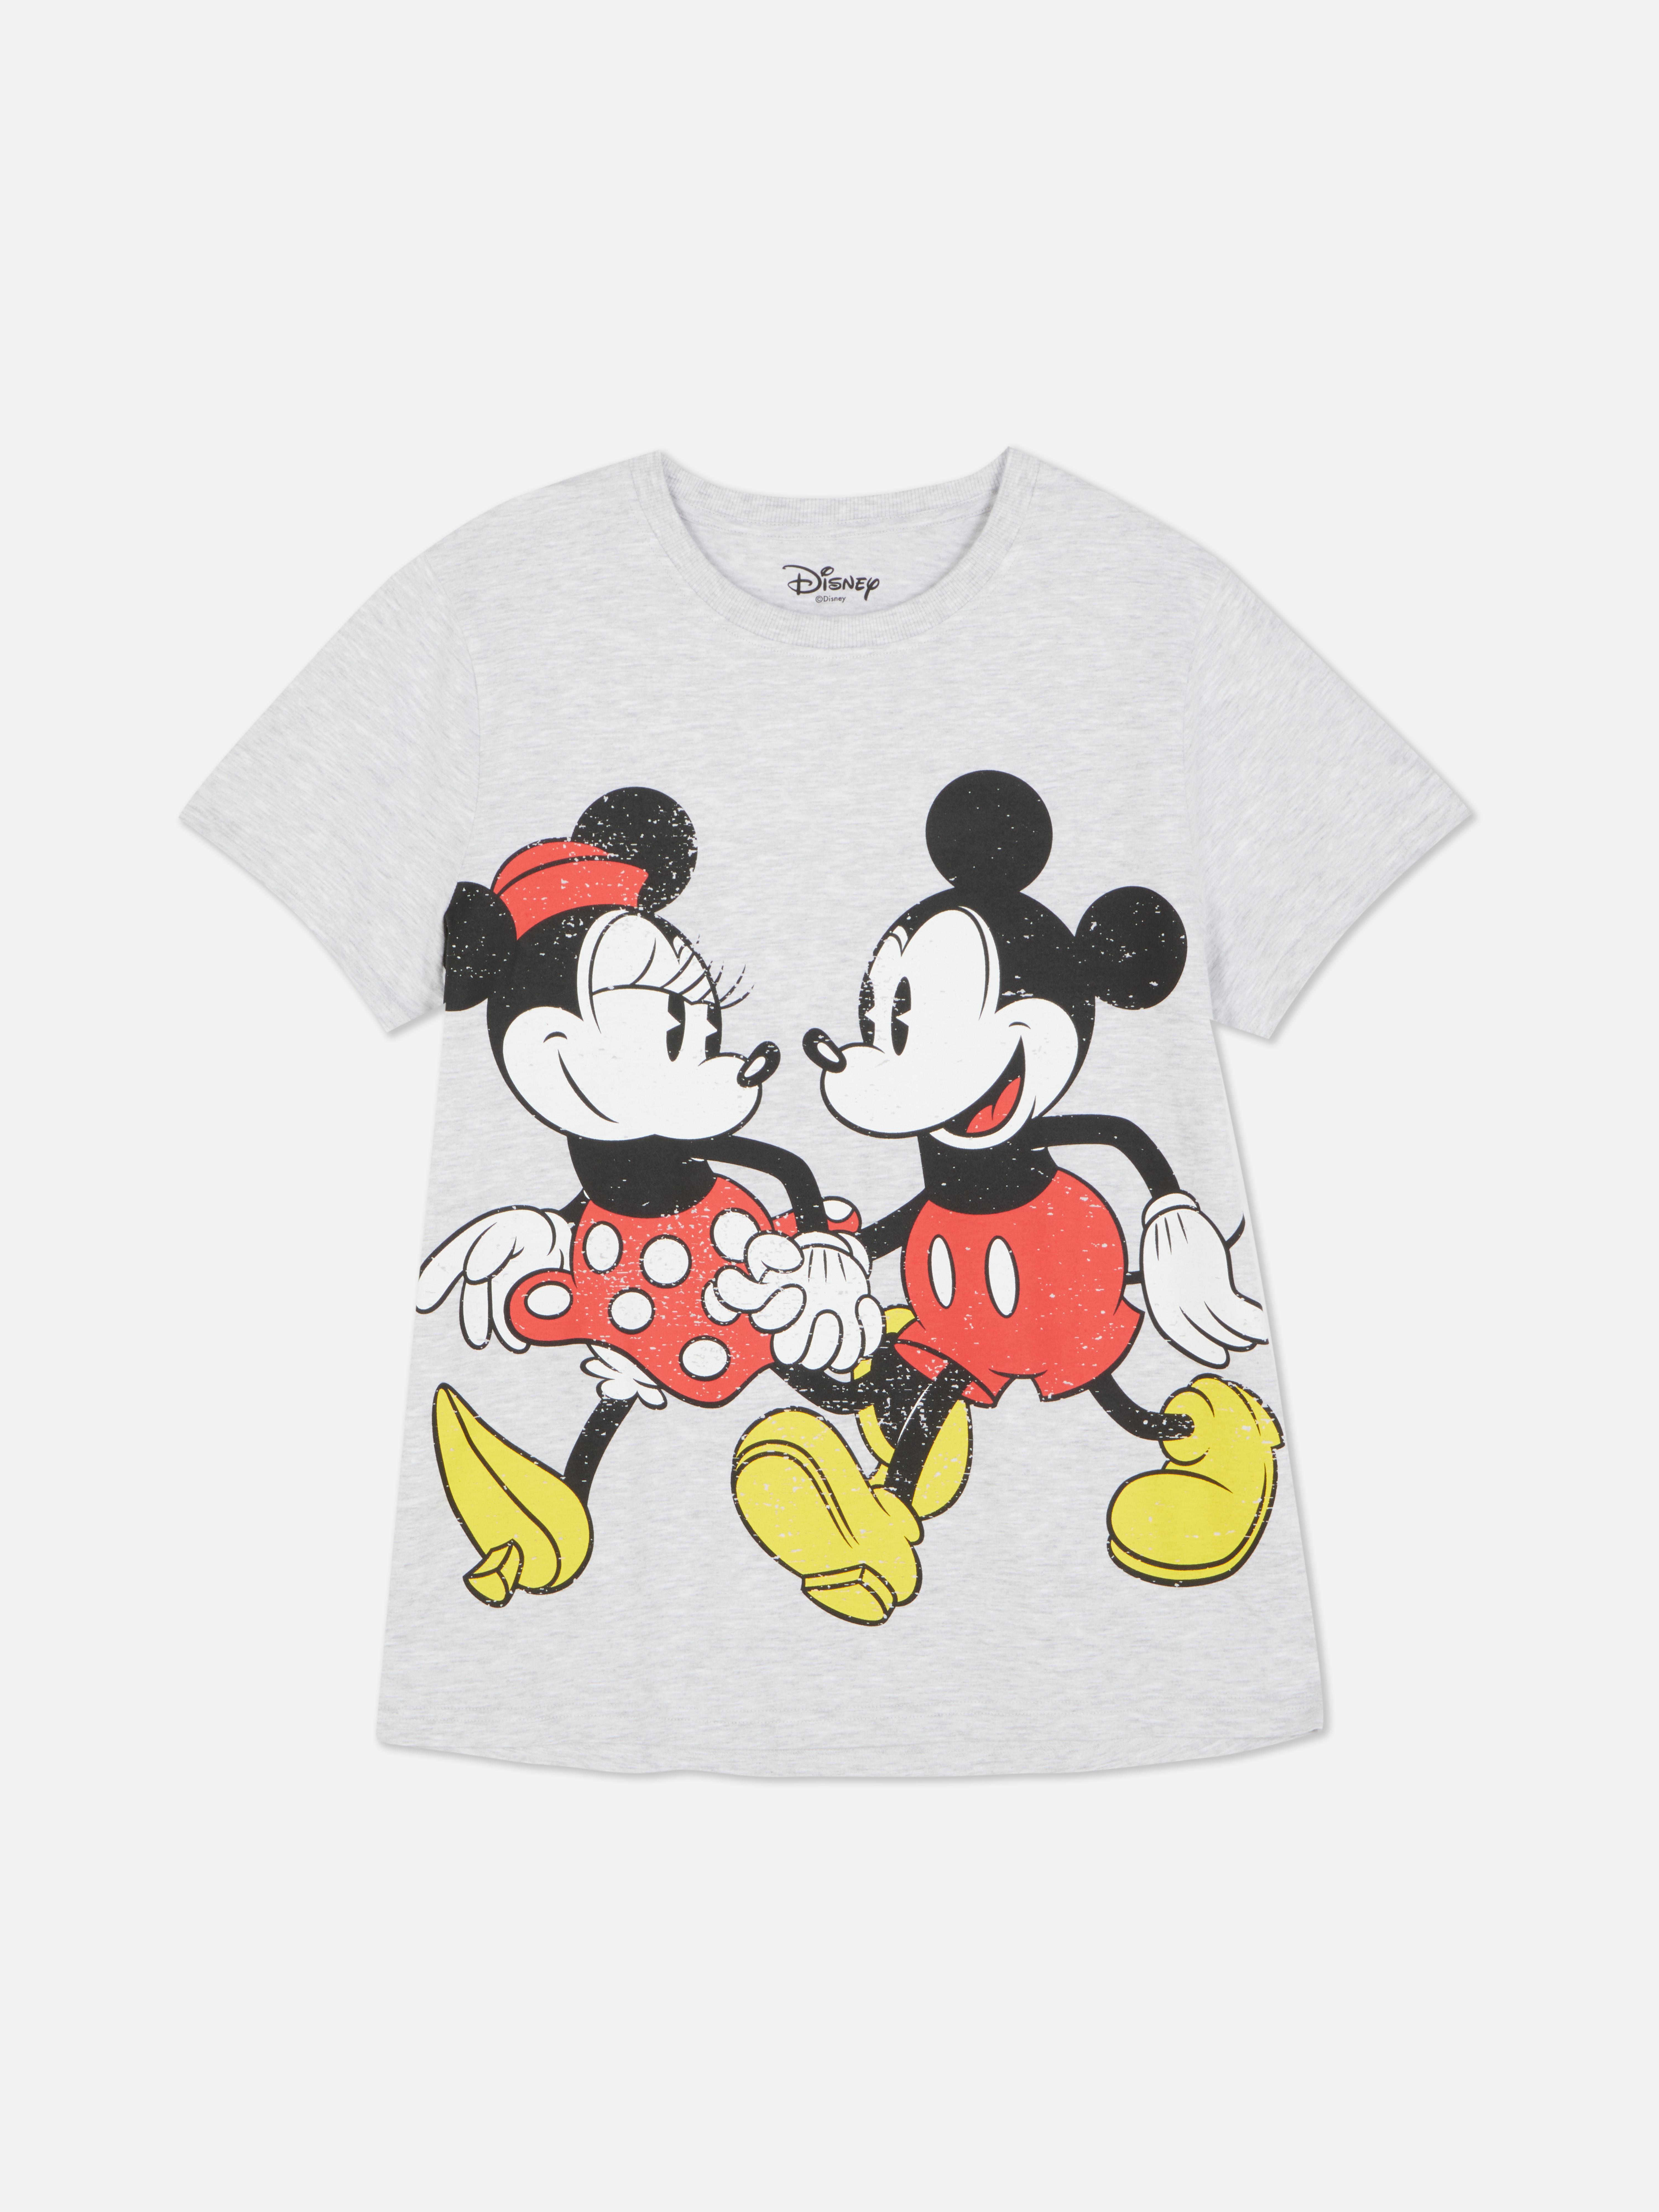 Minnie Maus, Mickey Mouse T-Shirt